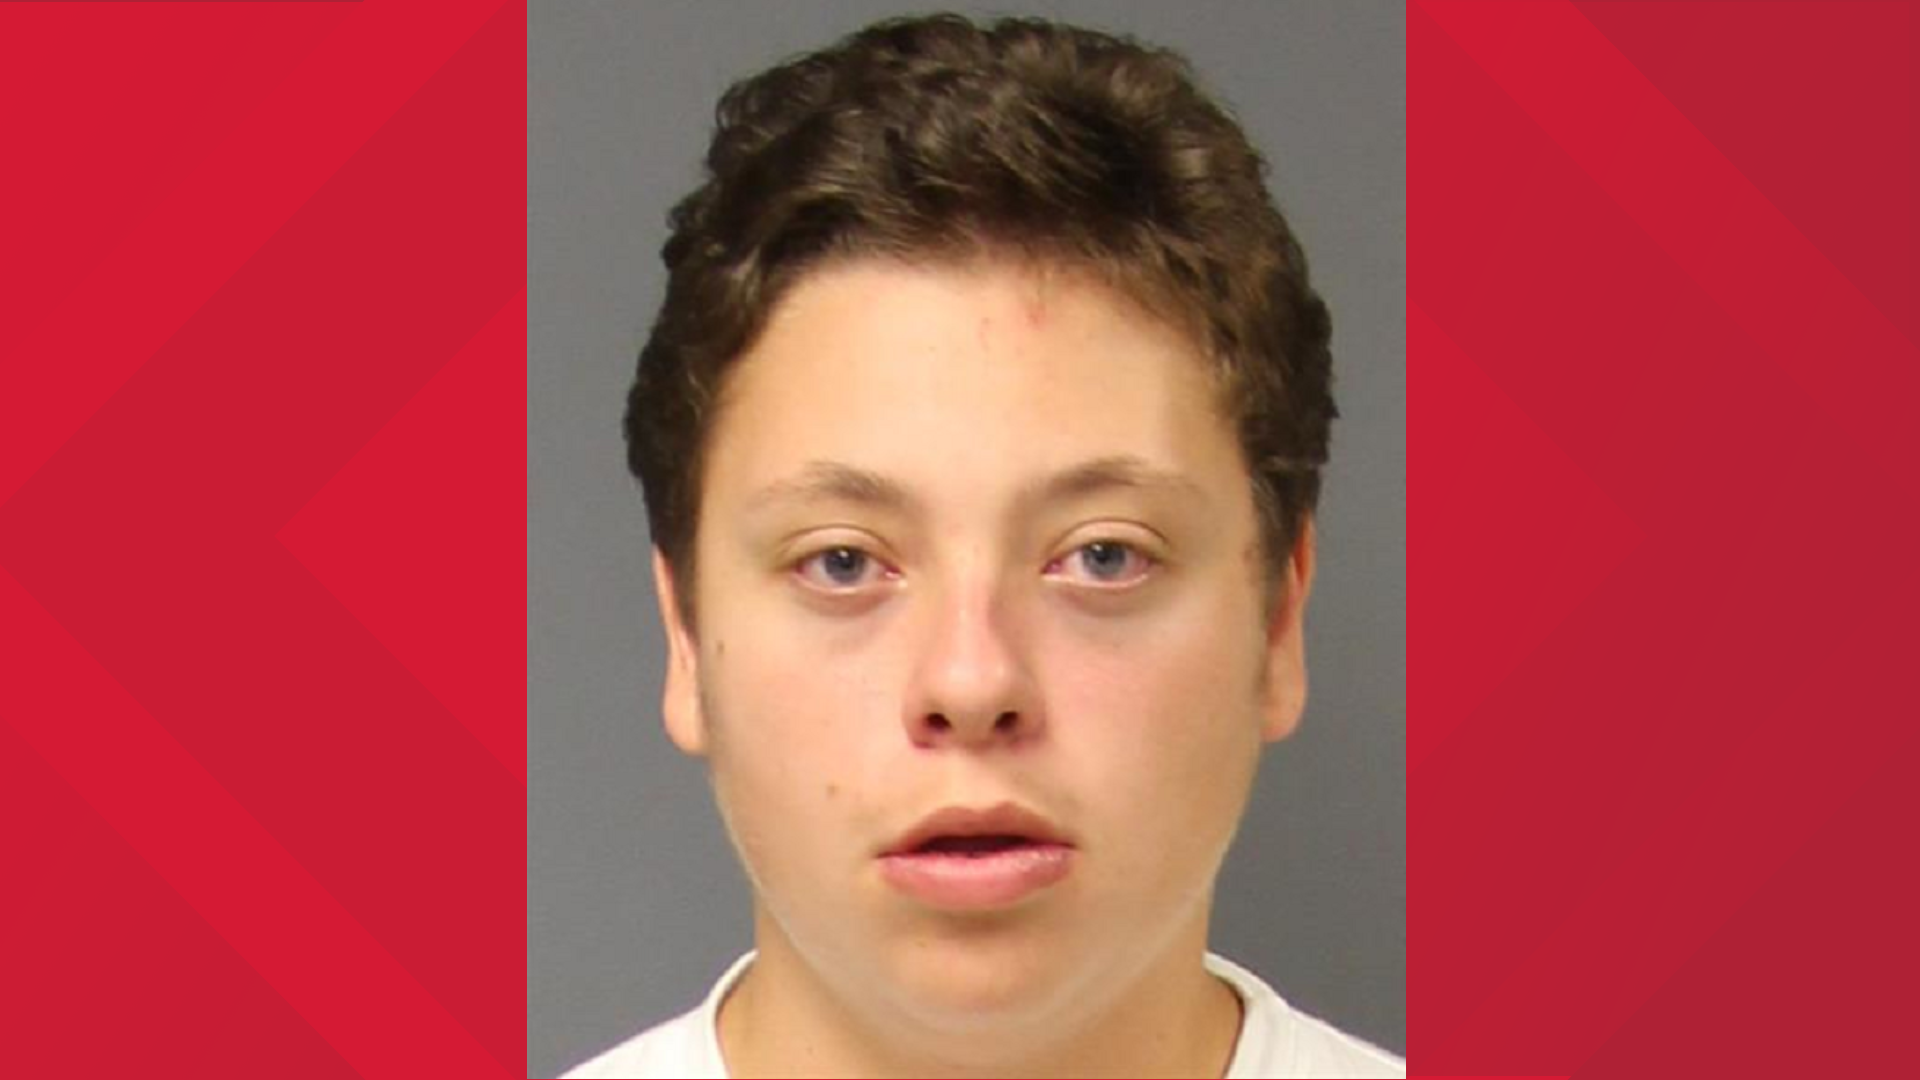 High Point University student 19-year-old Paul Steber of Boston, Massachusetts, admitted to officers he was planning a school shooting. Police say Steber was found with two guns and ammunition in his dorm room and had a "plan and timeline to kill people."